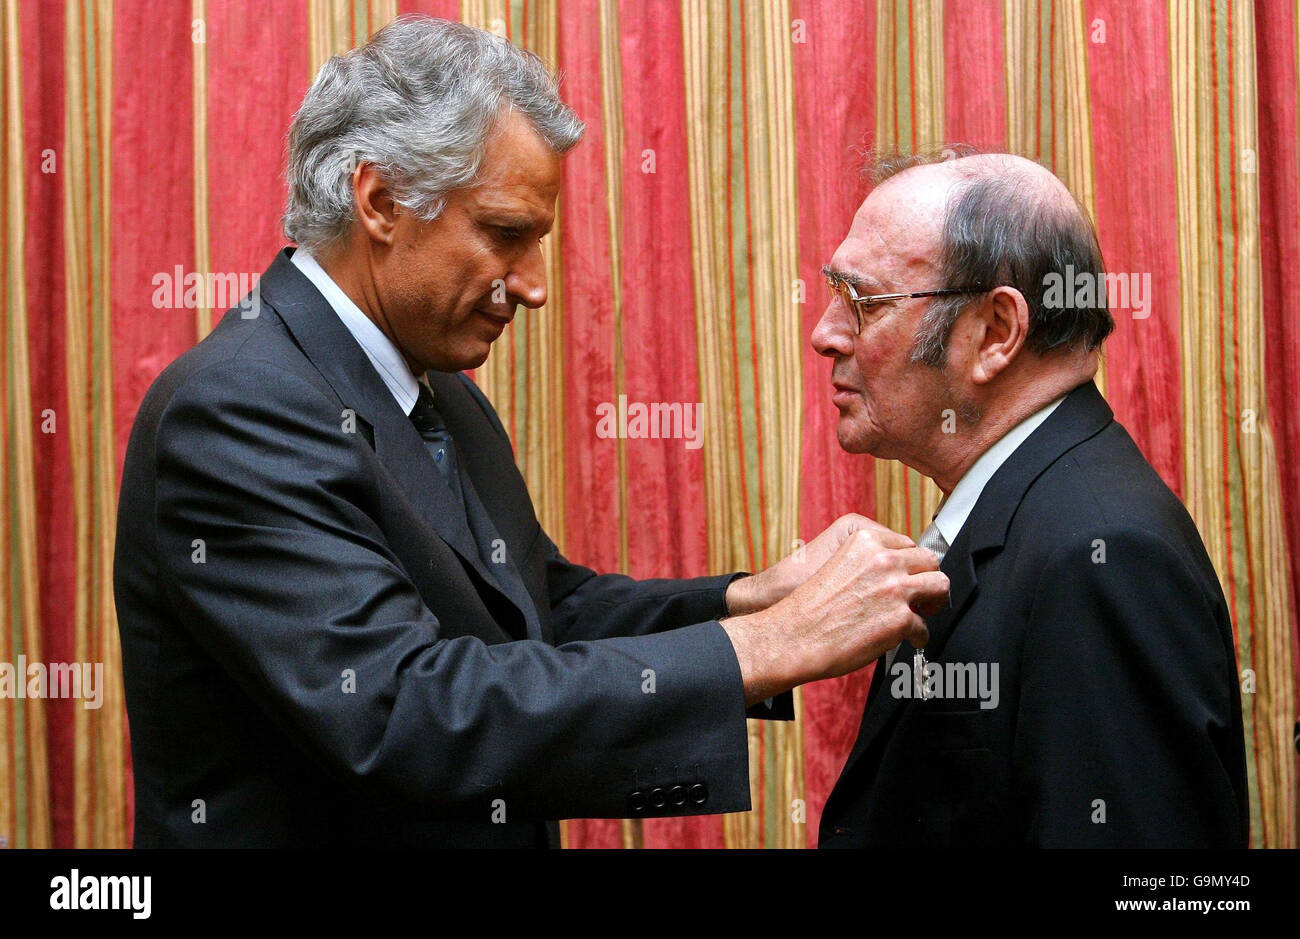 Nobel-winning British playwright Harold Pinter (right) is awarded the French Legion d'honneur by French Prime Minster Dominique de Villepin (left), at the French Embassy in London. Stock Photo